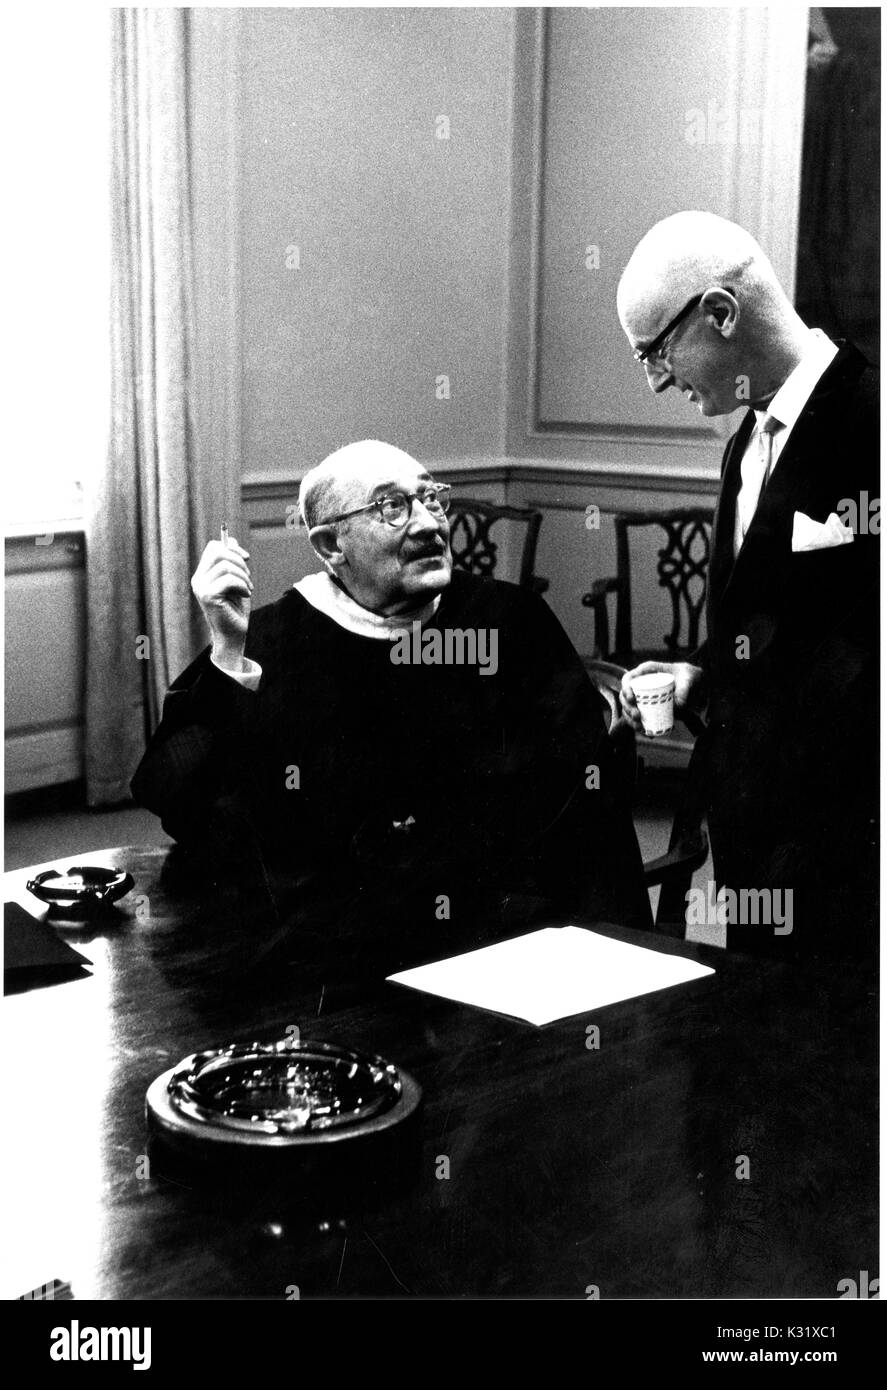 Executive Vice-President of Johns Hopkins University P. Stewart Macaulay (left) has a conversation with host of the Johns Hopkins Science Review Lynne Poole (right) during the university's commemoration day, celebrating the university's founding, in Baltimore, Maryland, February 22, 1963. Stock Photo